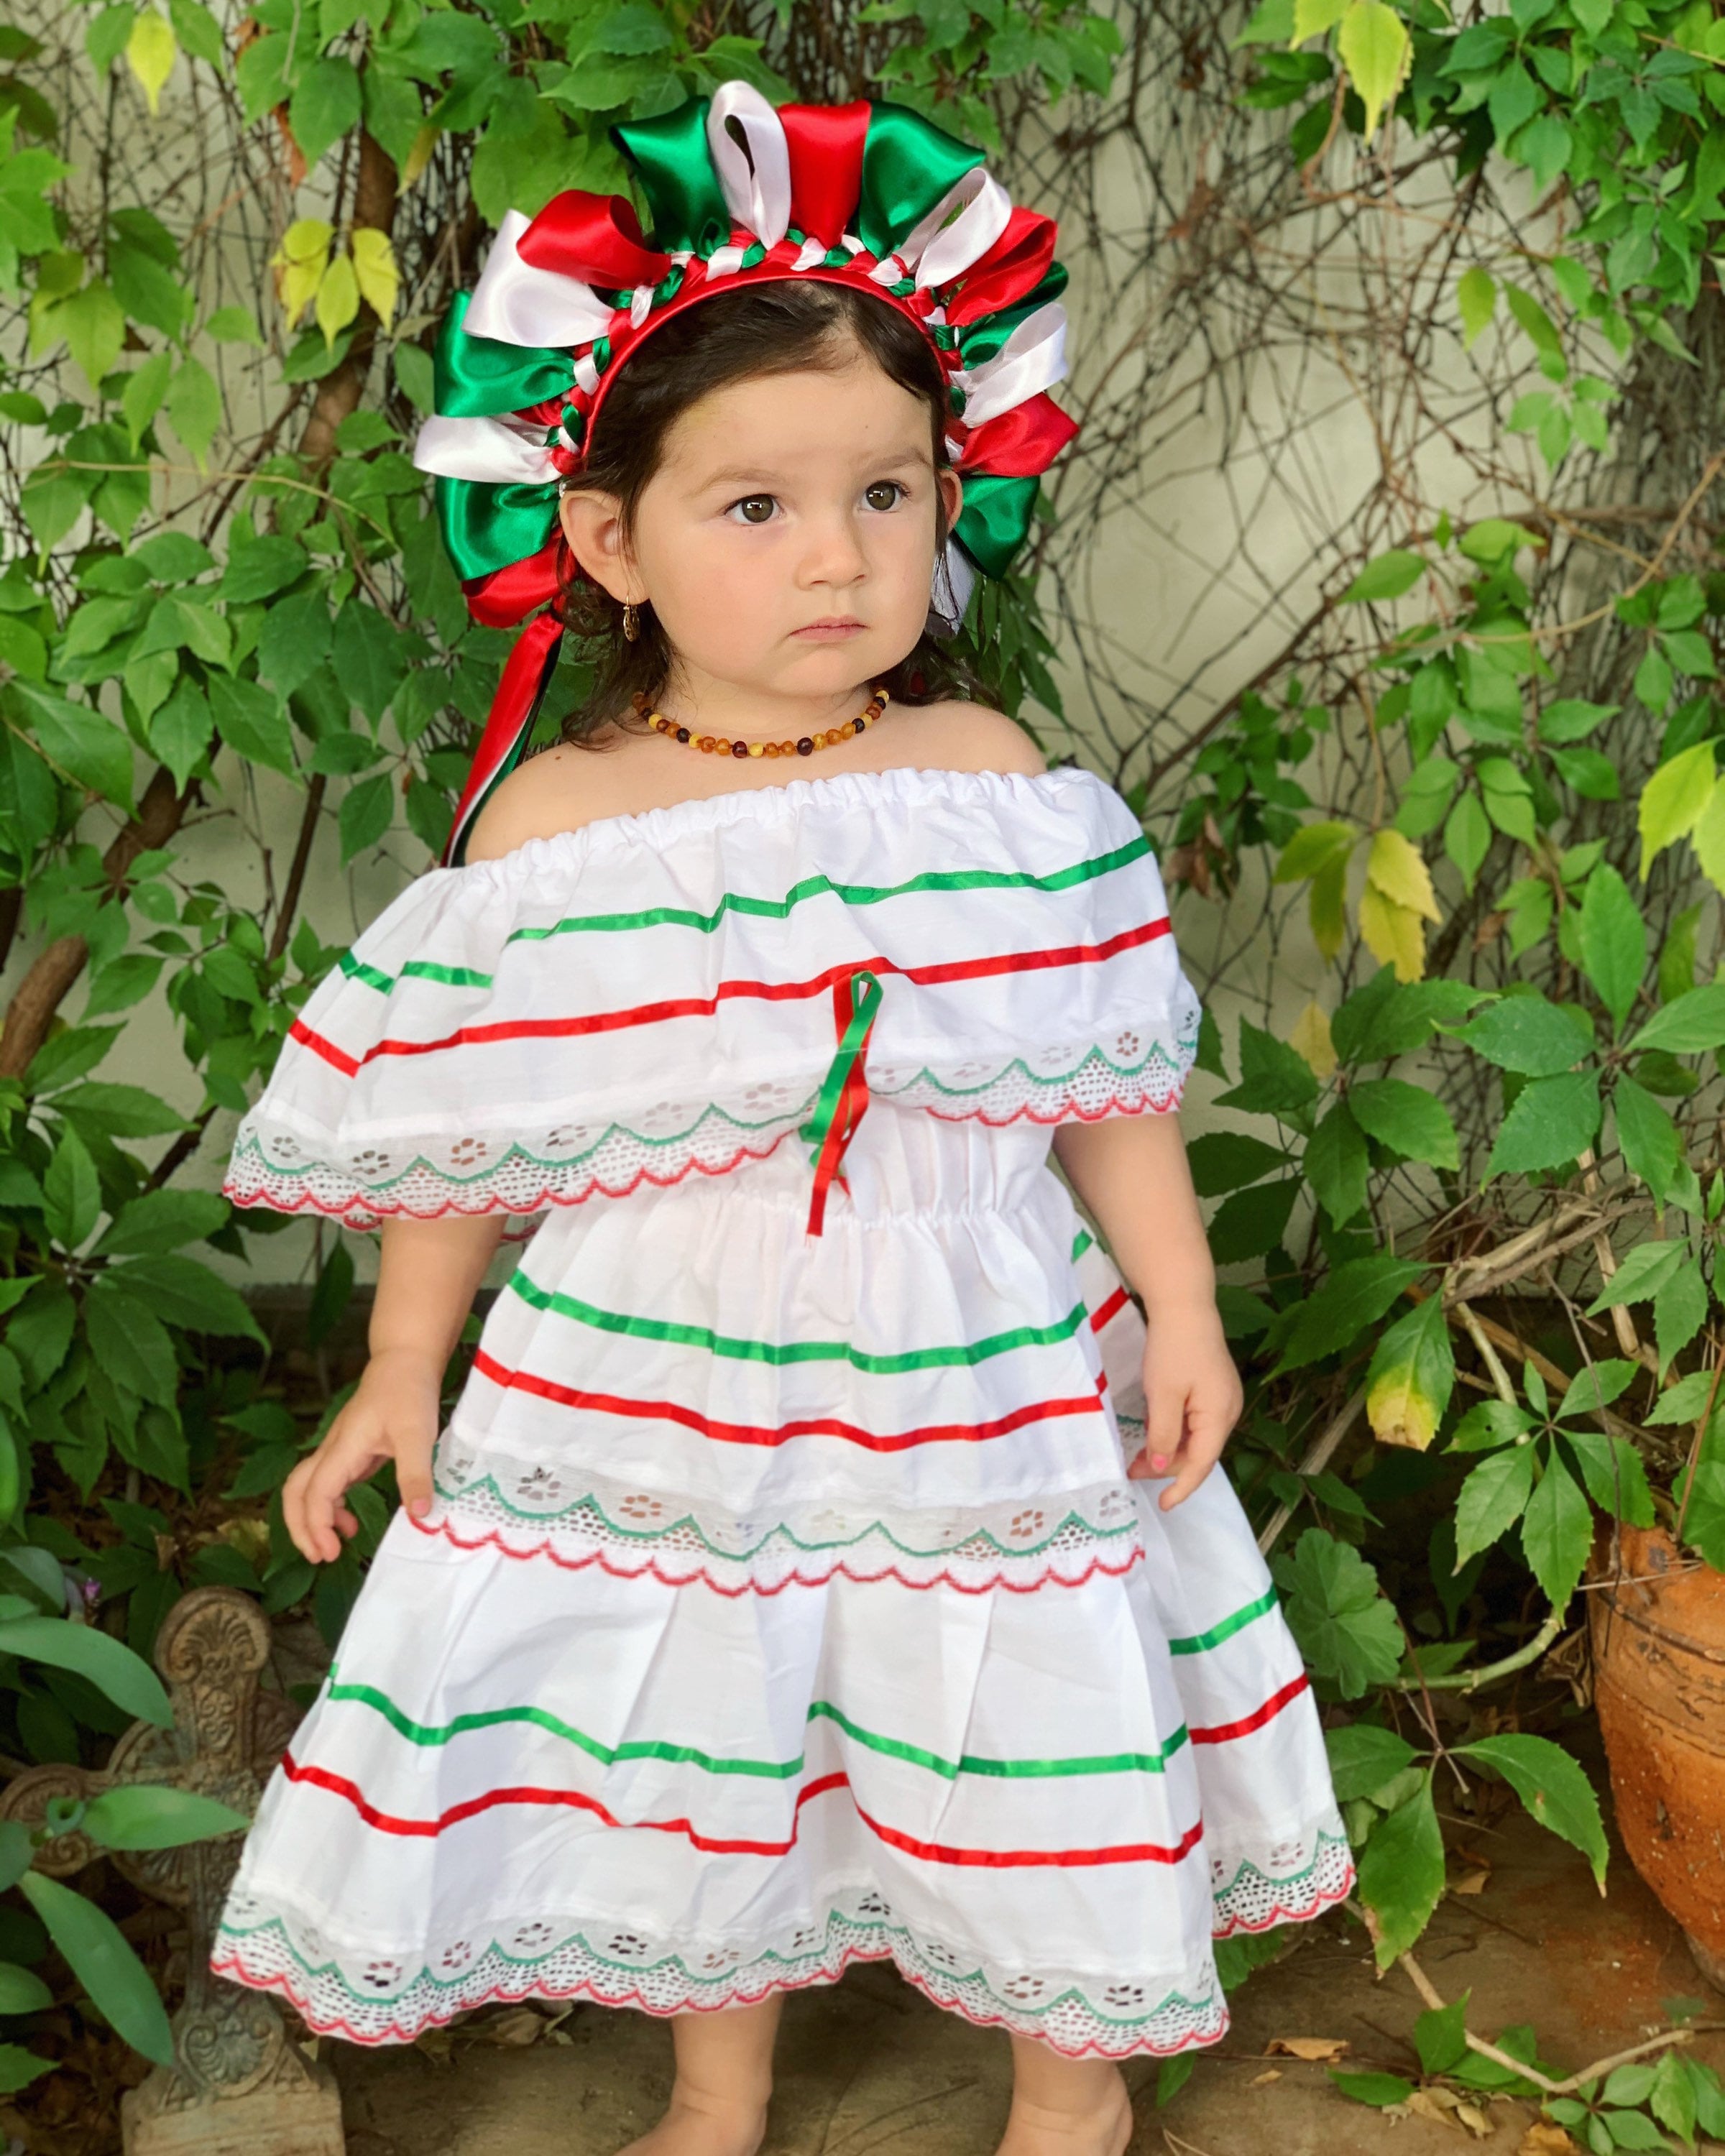 Fiesta Mexican Party Dress Colorful Baby Toddler Flower Girl - Etsy